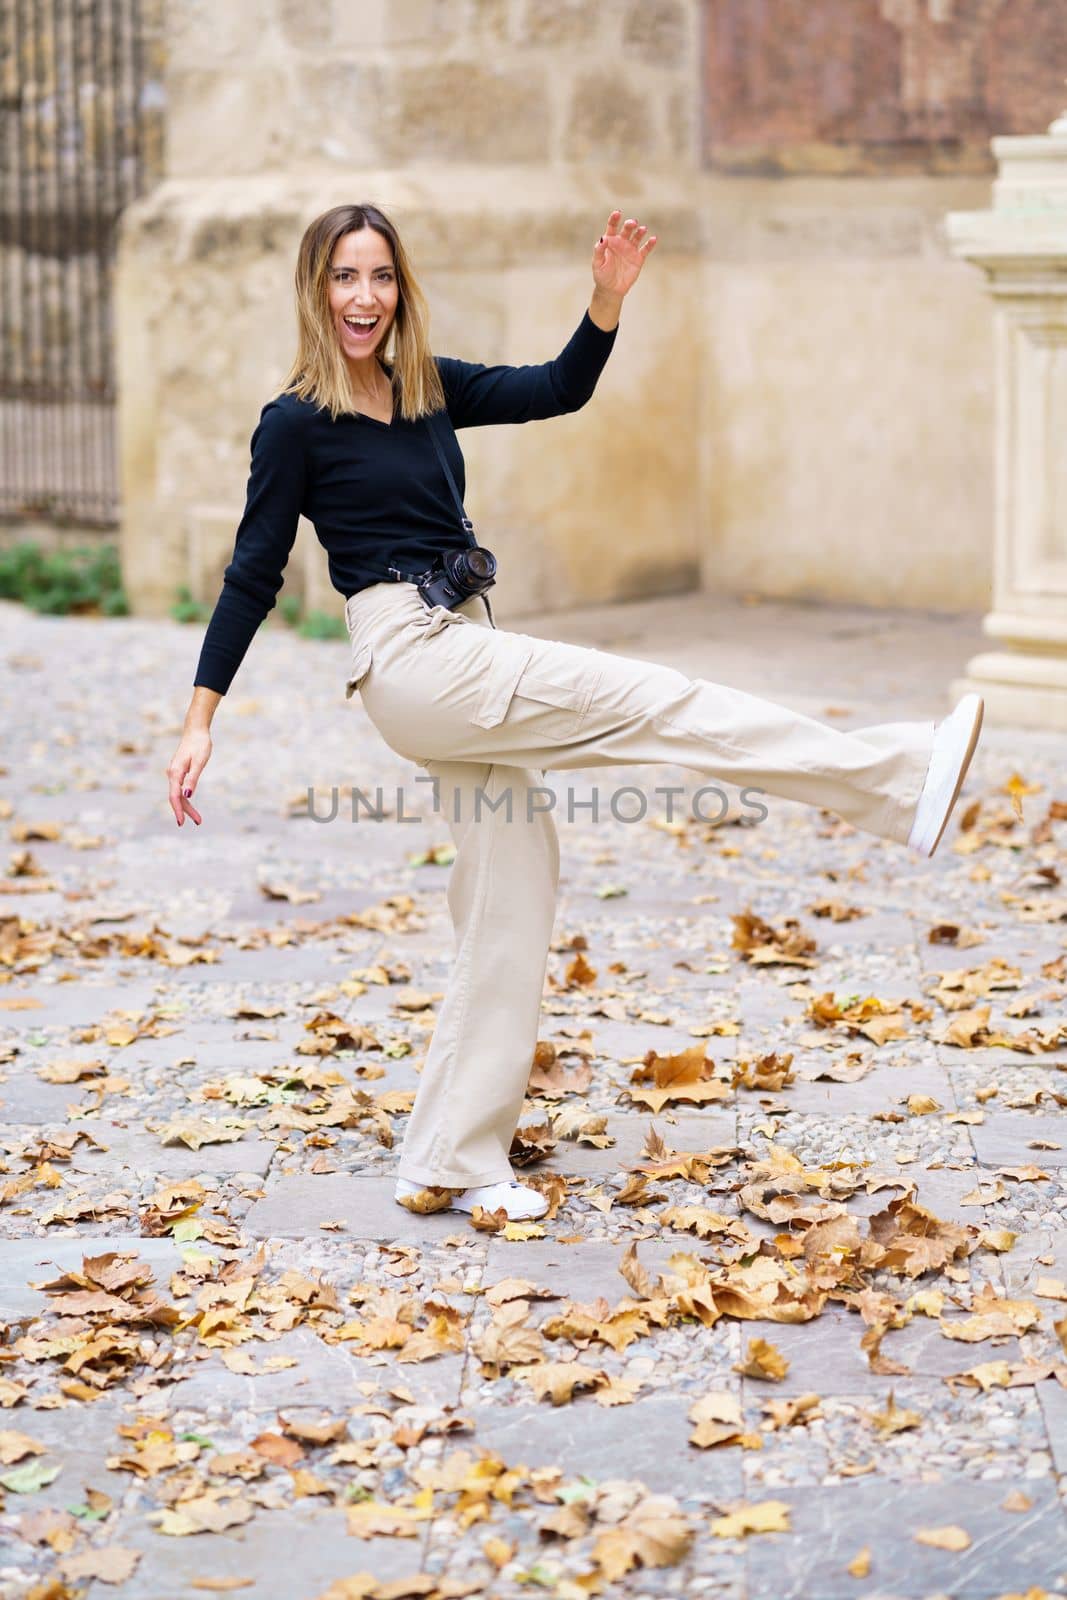 Cheerful young woman kicking fallen leaves while walking in park by javiindy